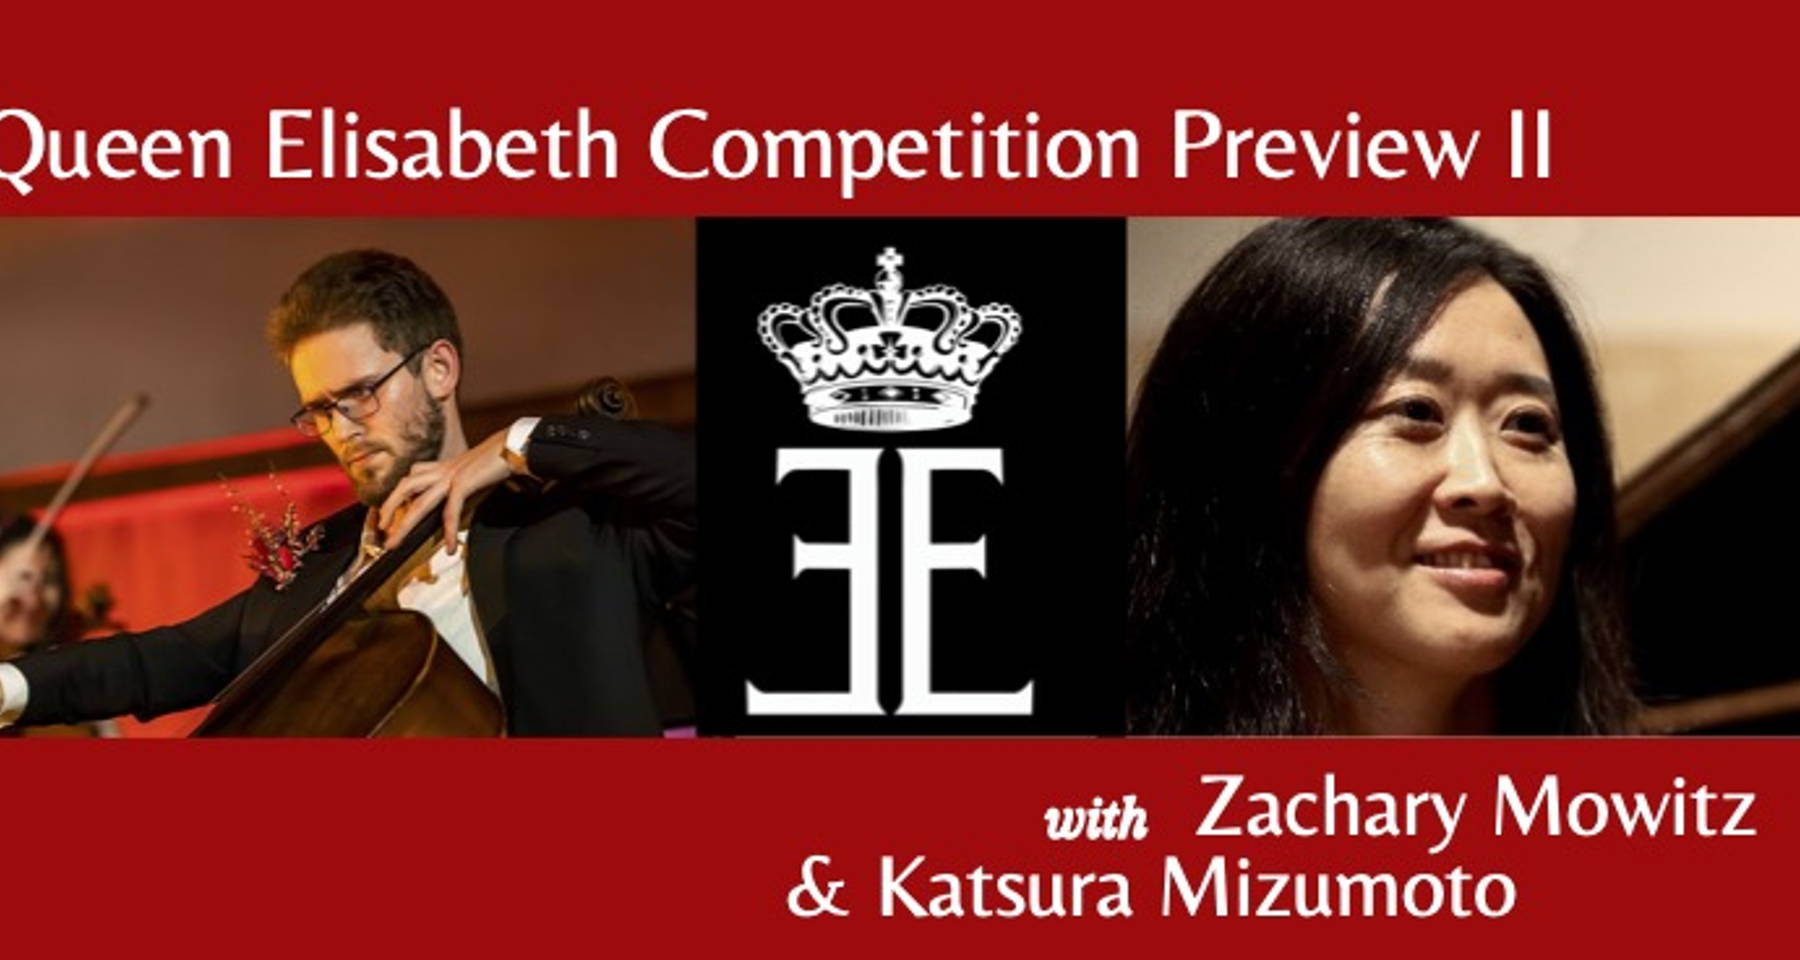 Queen Elisabeth Competition Preview II: Cellist Zachary Mowitz performs Beethoven, Stravinsky, and Haydn